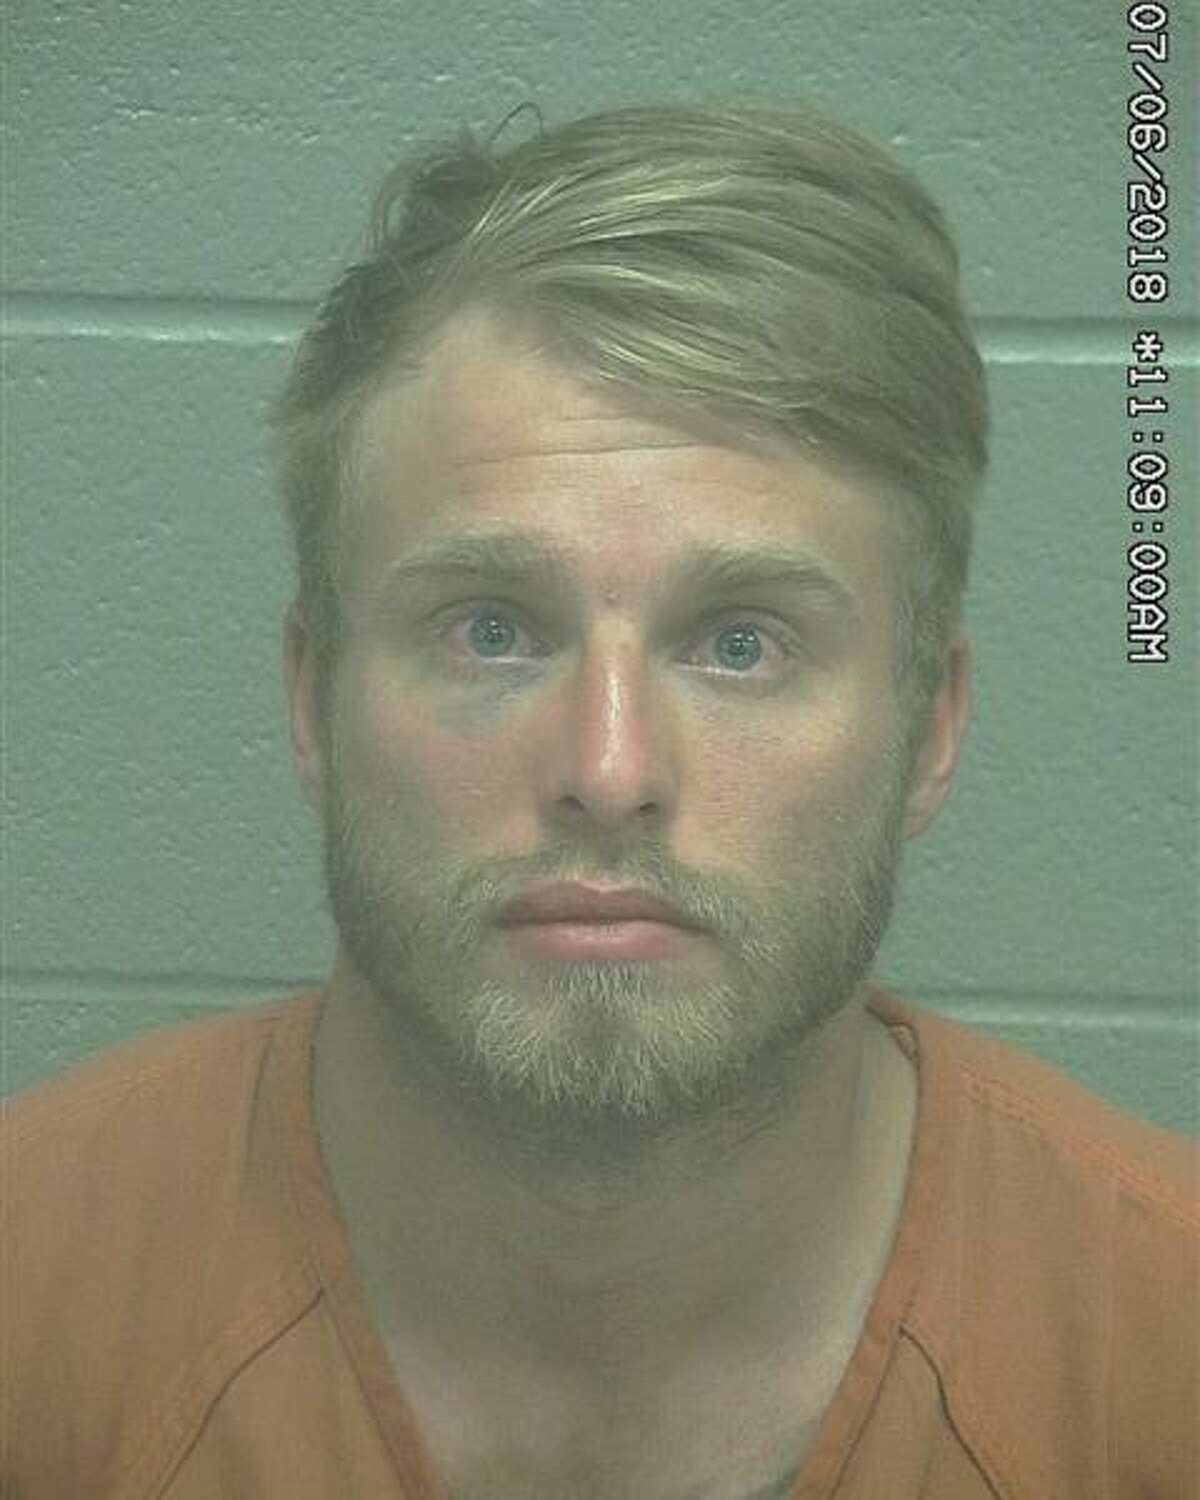 Garrett Wayne Martin-Goodman, 27,  was arrested June 7 after he allegedly stabbed a man, according to court documents.